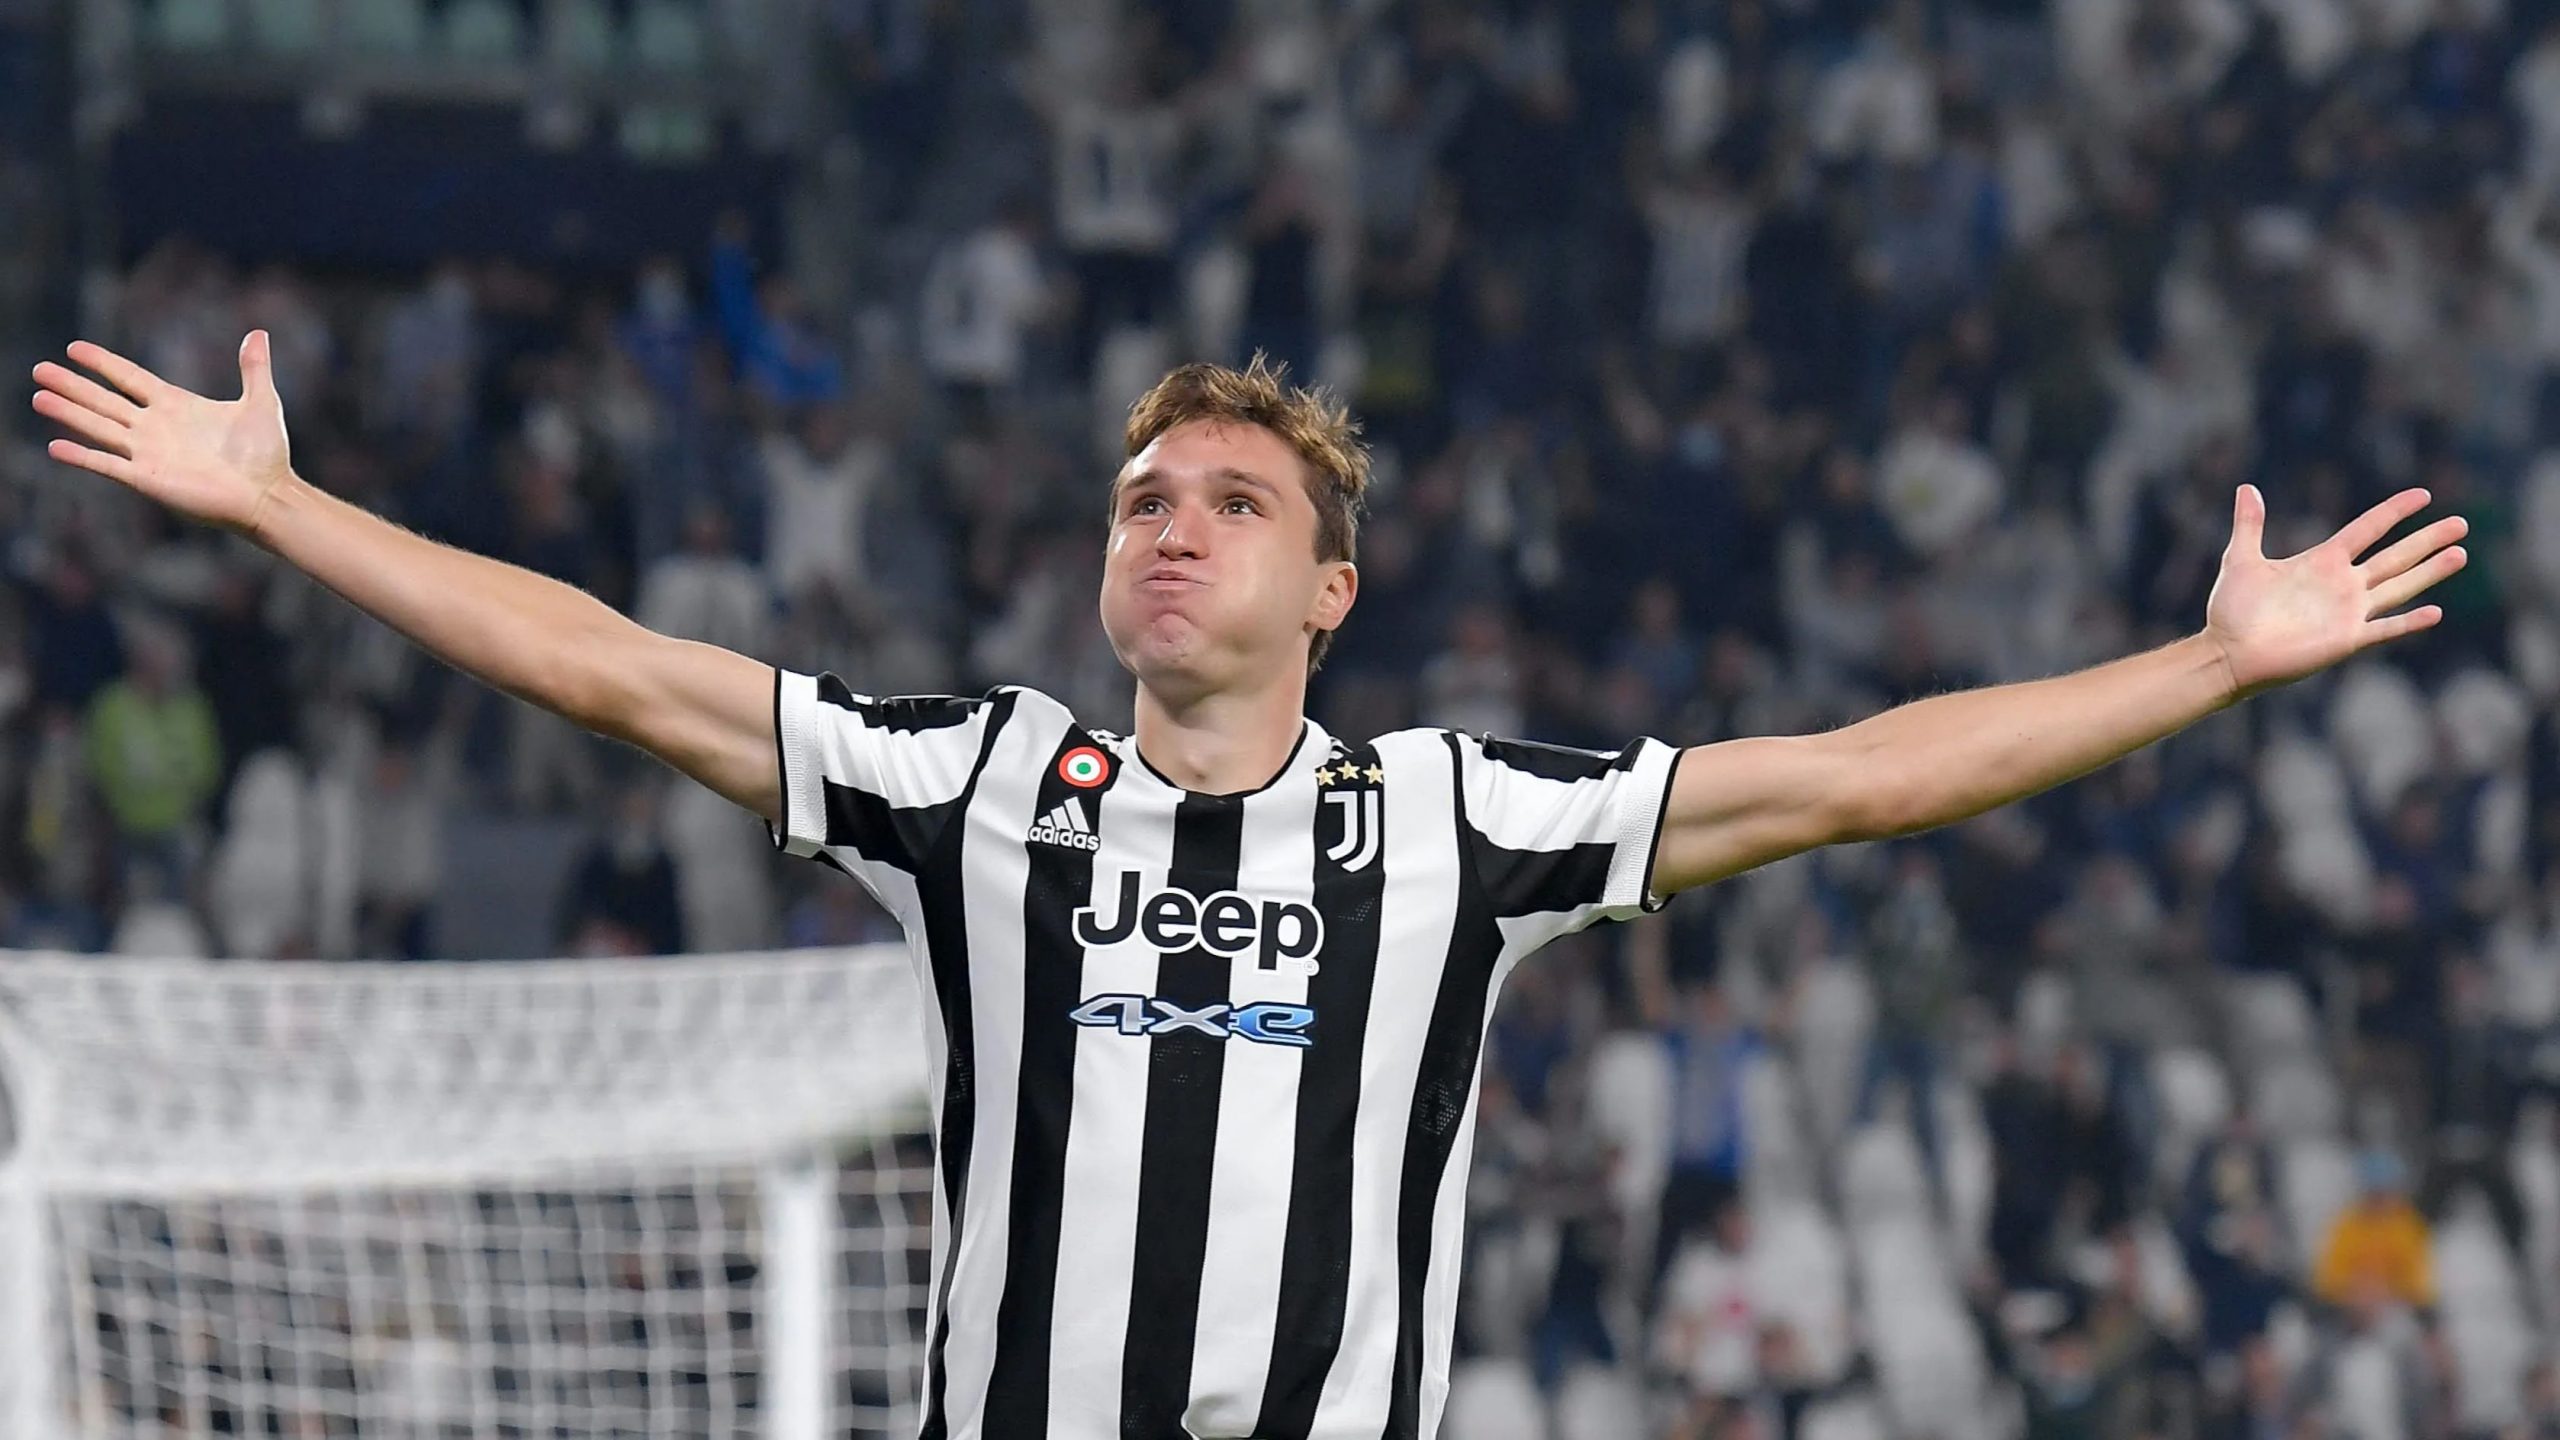 UCL: Chelsea rue missed chances as Chiesa winner seals 3 points for Juventus